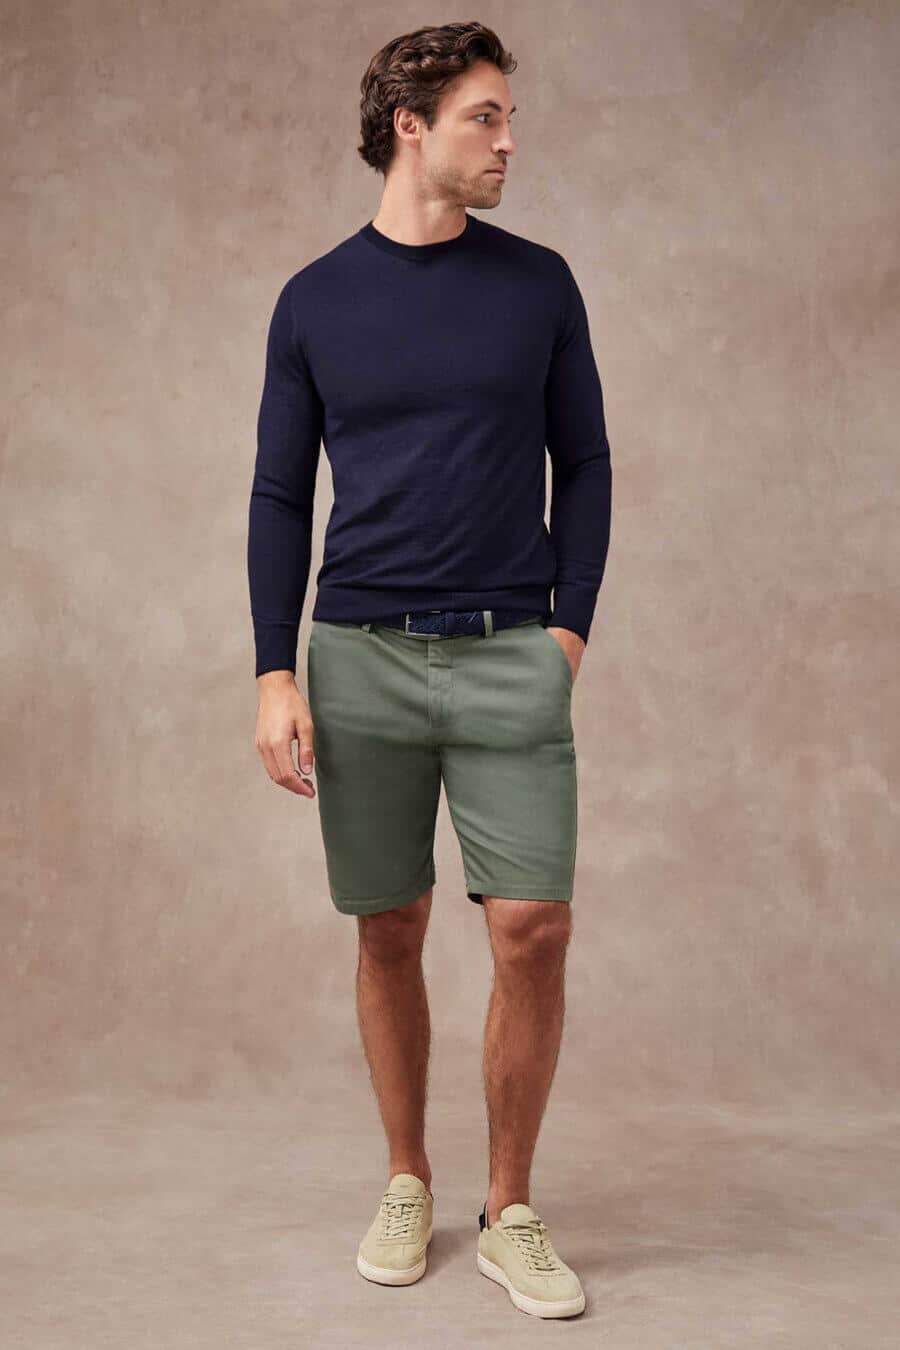 Men's green shorts, blue crew neck and suede sneakers summer outfit